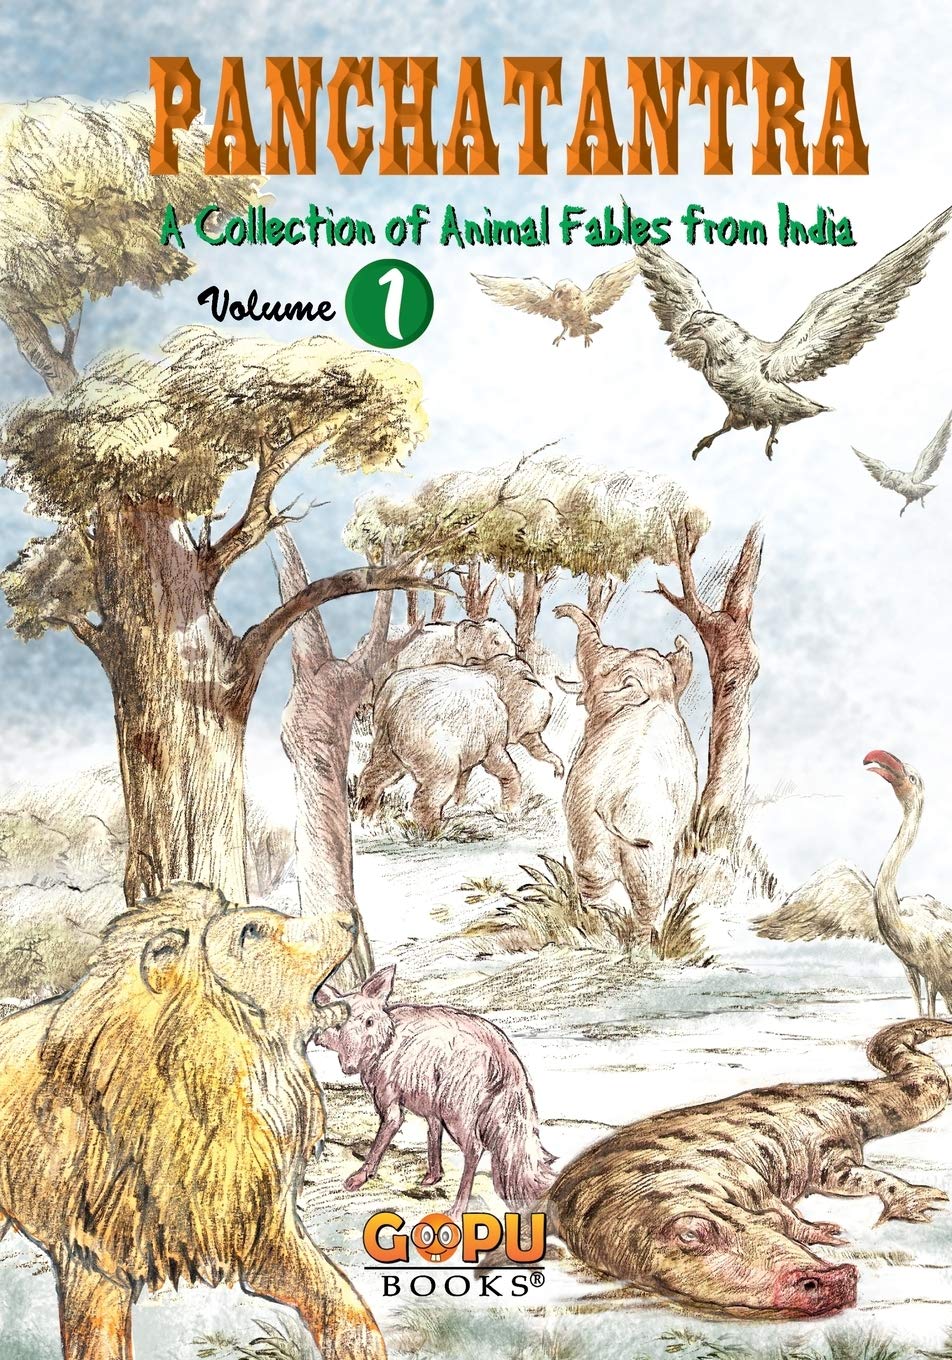 Panchatantra - Volume 1 (A Collection of Animal Fables from India)